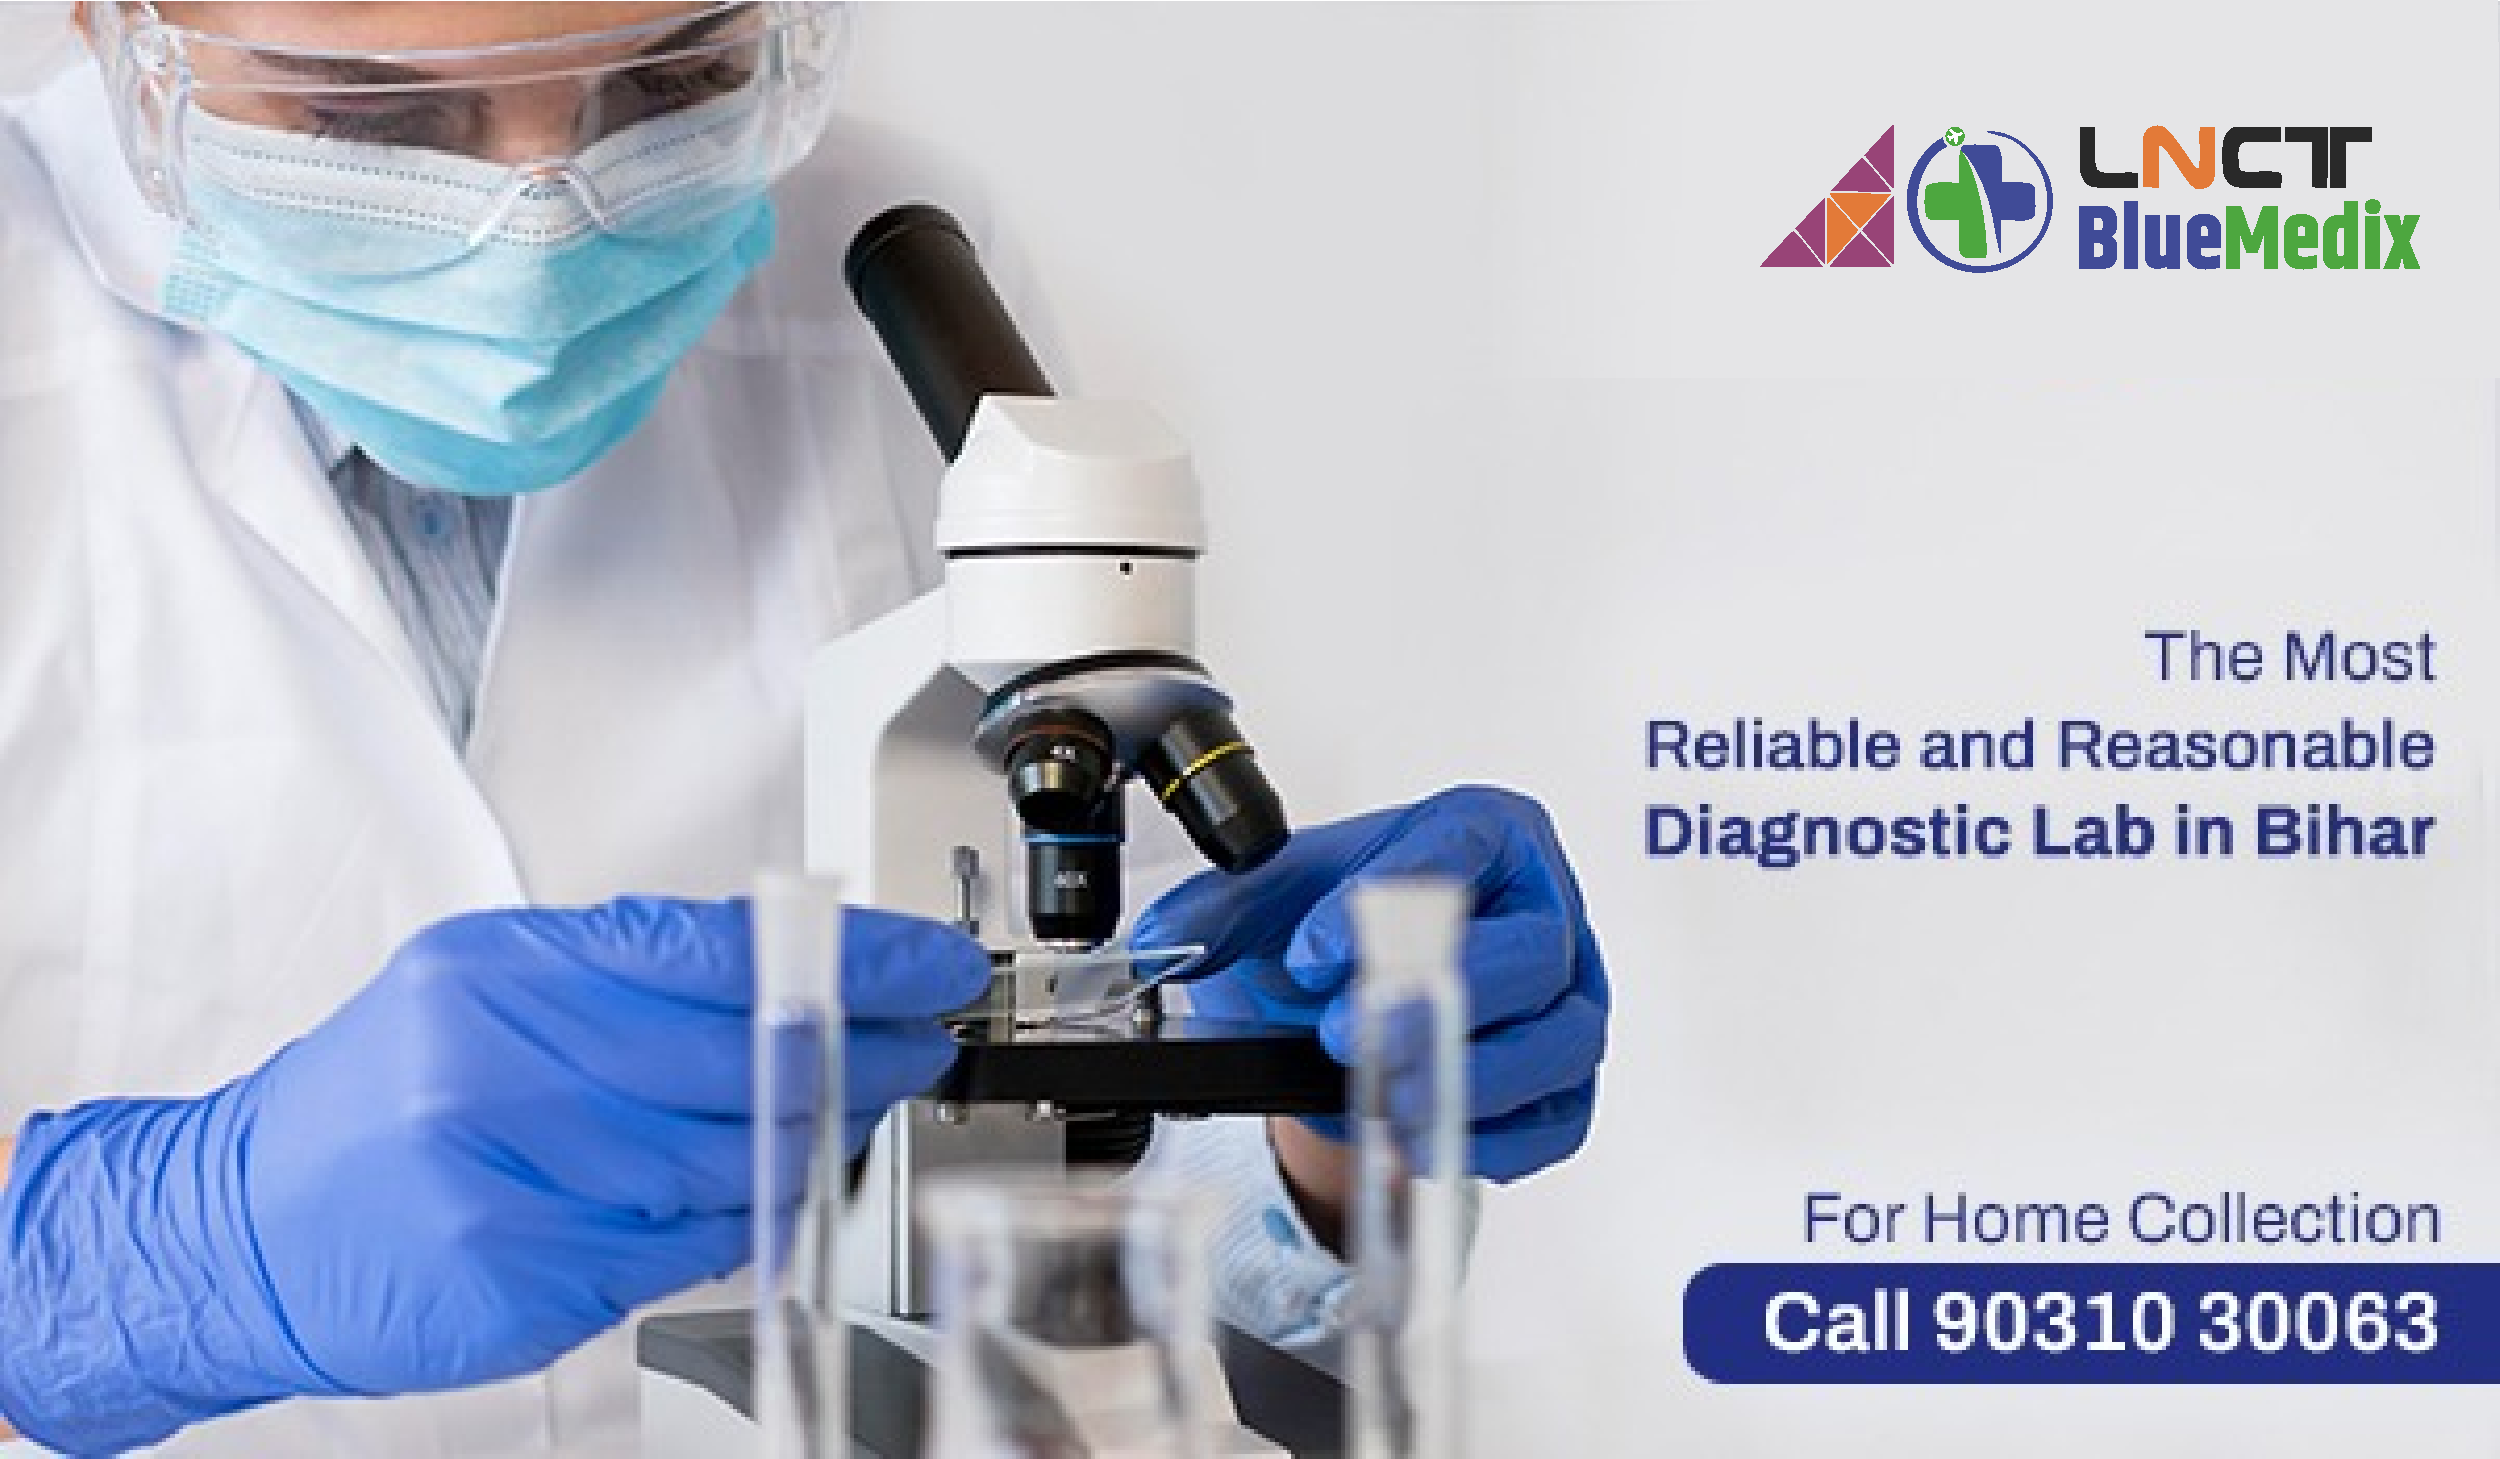 The Most Reliable and Reasonable Diagnostic Lab in Bihar – BlueMedix